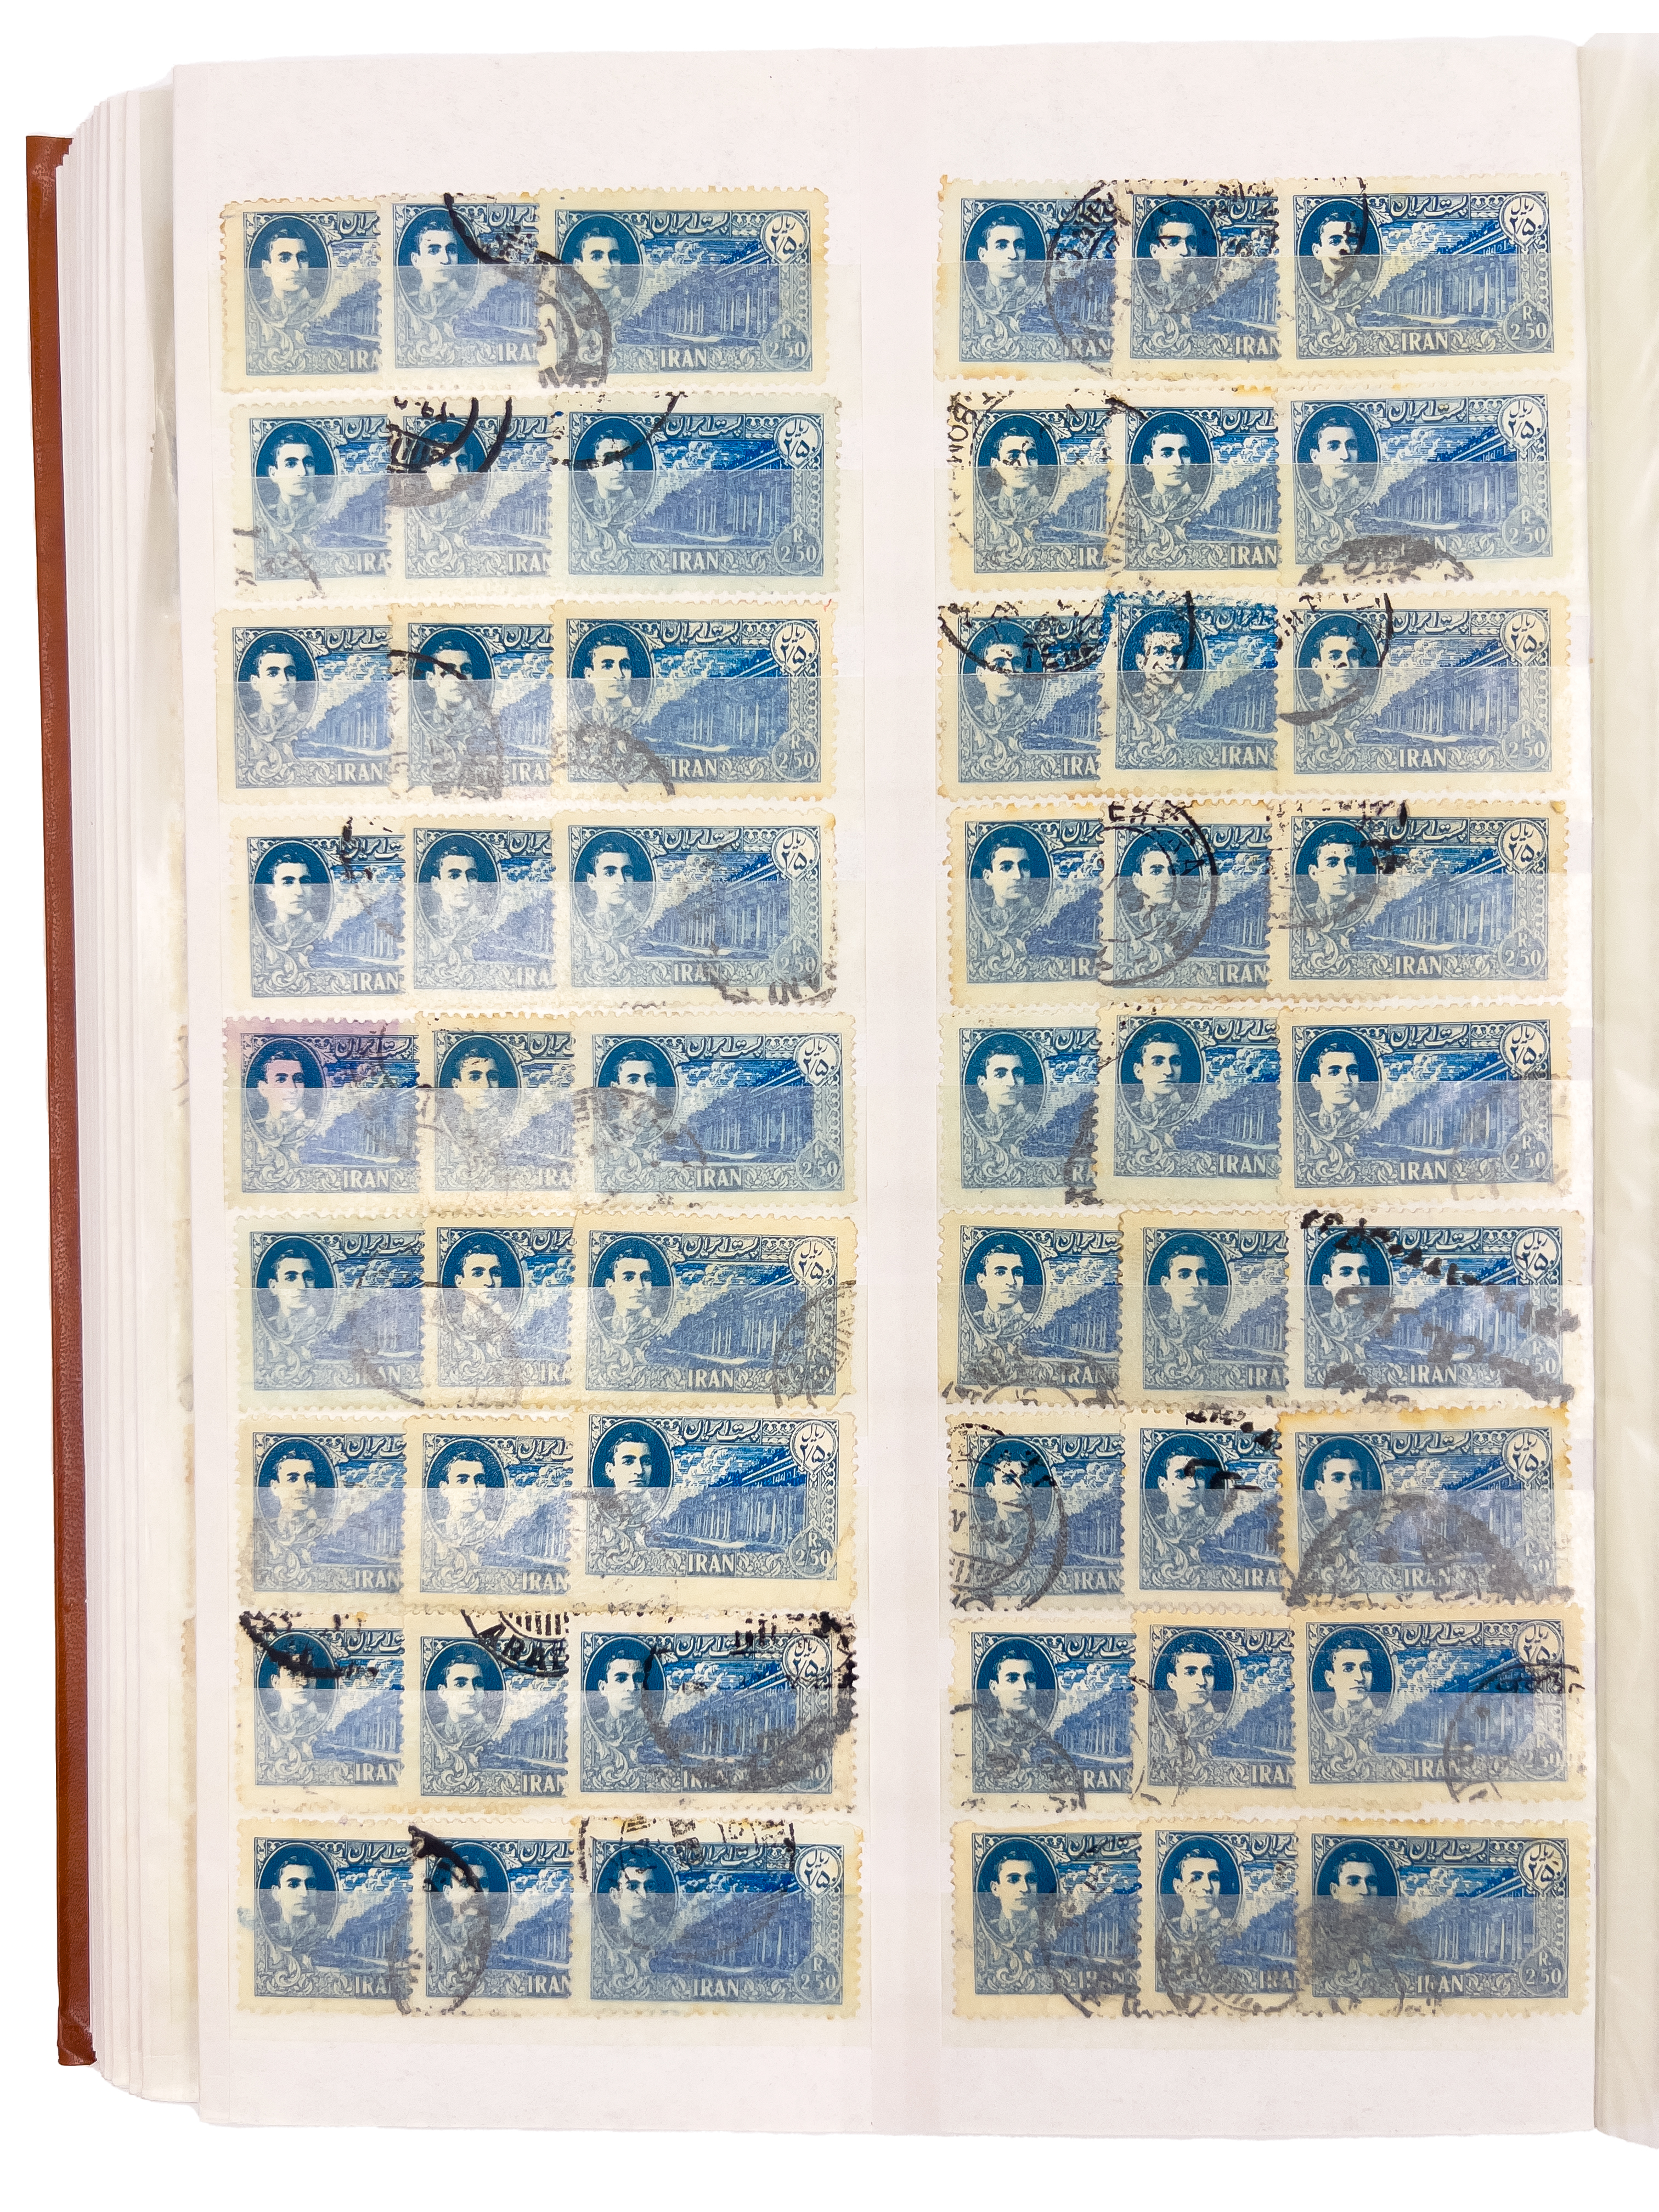 RARE & EXTENSIVE COLLECTION OF PERSIAN PAHLAVI POST STAMPS - Image 27 of 63